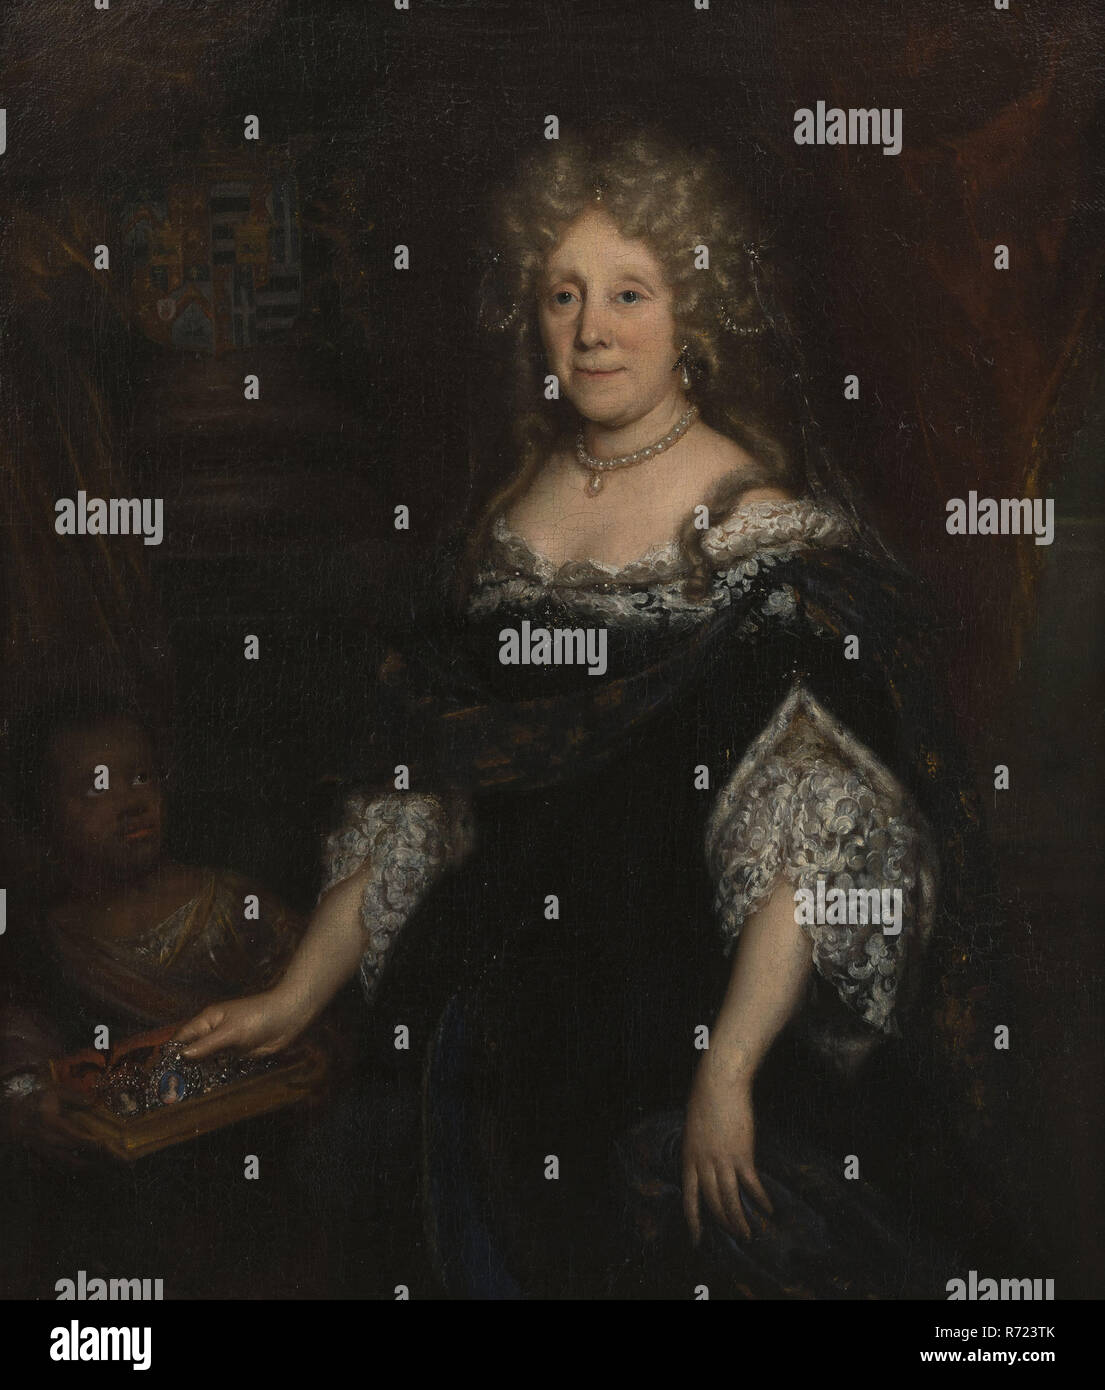 David van der Plaes (Amsterdam 1647 - Amsterdam 1704), Portrait of Margaretha Raephorst (1625-1690), portrait painting footage linen oil painting, Standing rectangular portrait of woman representing Margaretha van Raephorst wife of Cornelis Tromp (10546) Standing three quarters facing left. Hairstyle à la Hurluberlu pearls boat shaped décolleté trimmed with lace lace sleeves. On the left is 'negroid' child who gives her box in which number of portrait miniatures of which she holds one (depicting lady) in the right hand. Drapery column and balustrade in background. Top left coat of arms with ar Stock Photo